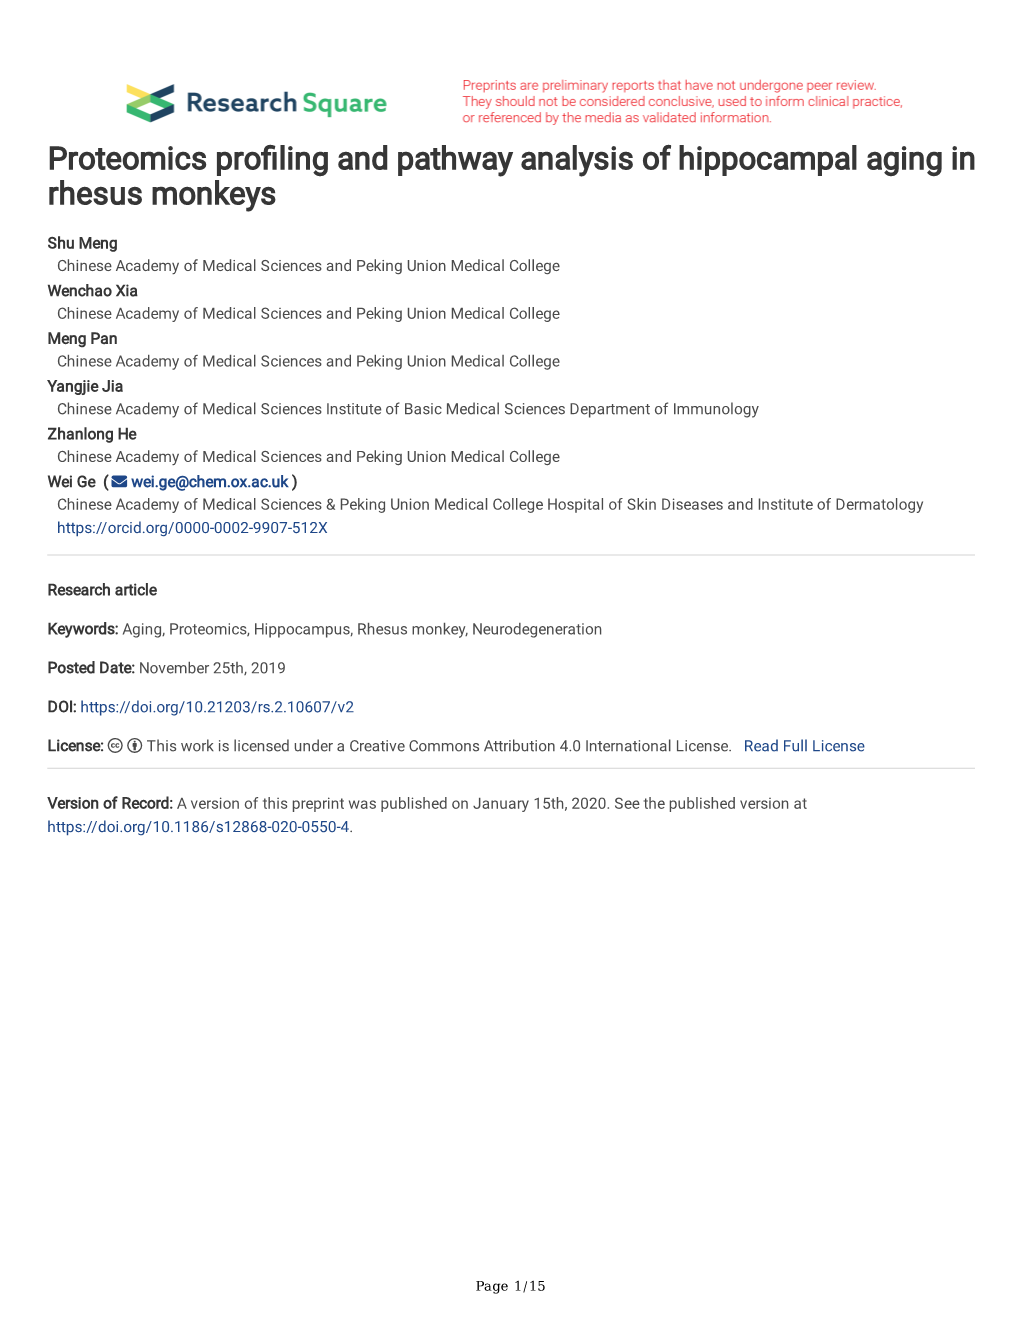 Proteomics Profiling and Pathway Analysis of Hippocampal Aging In